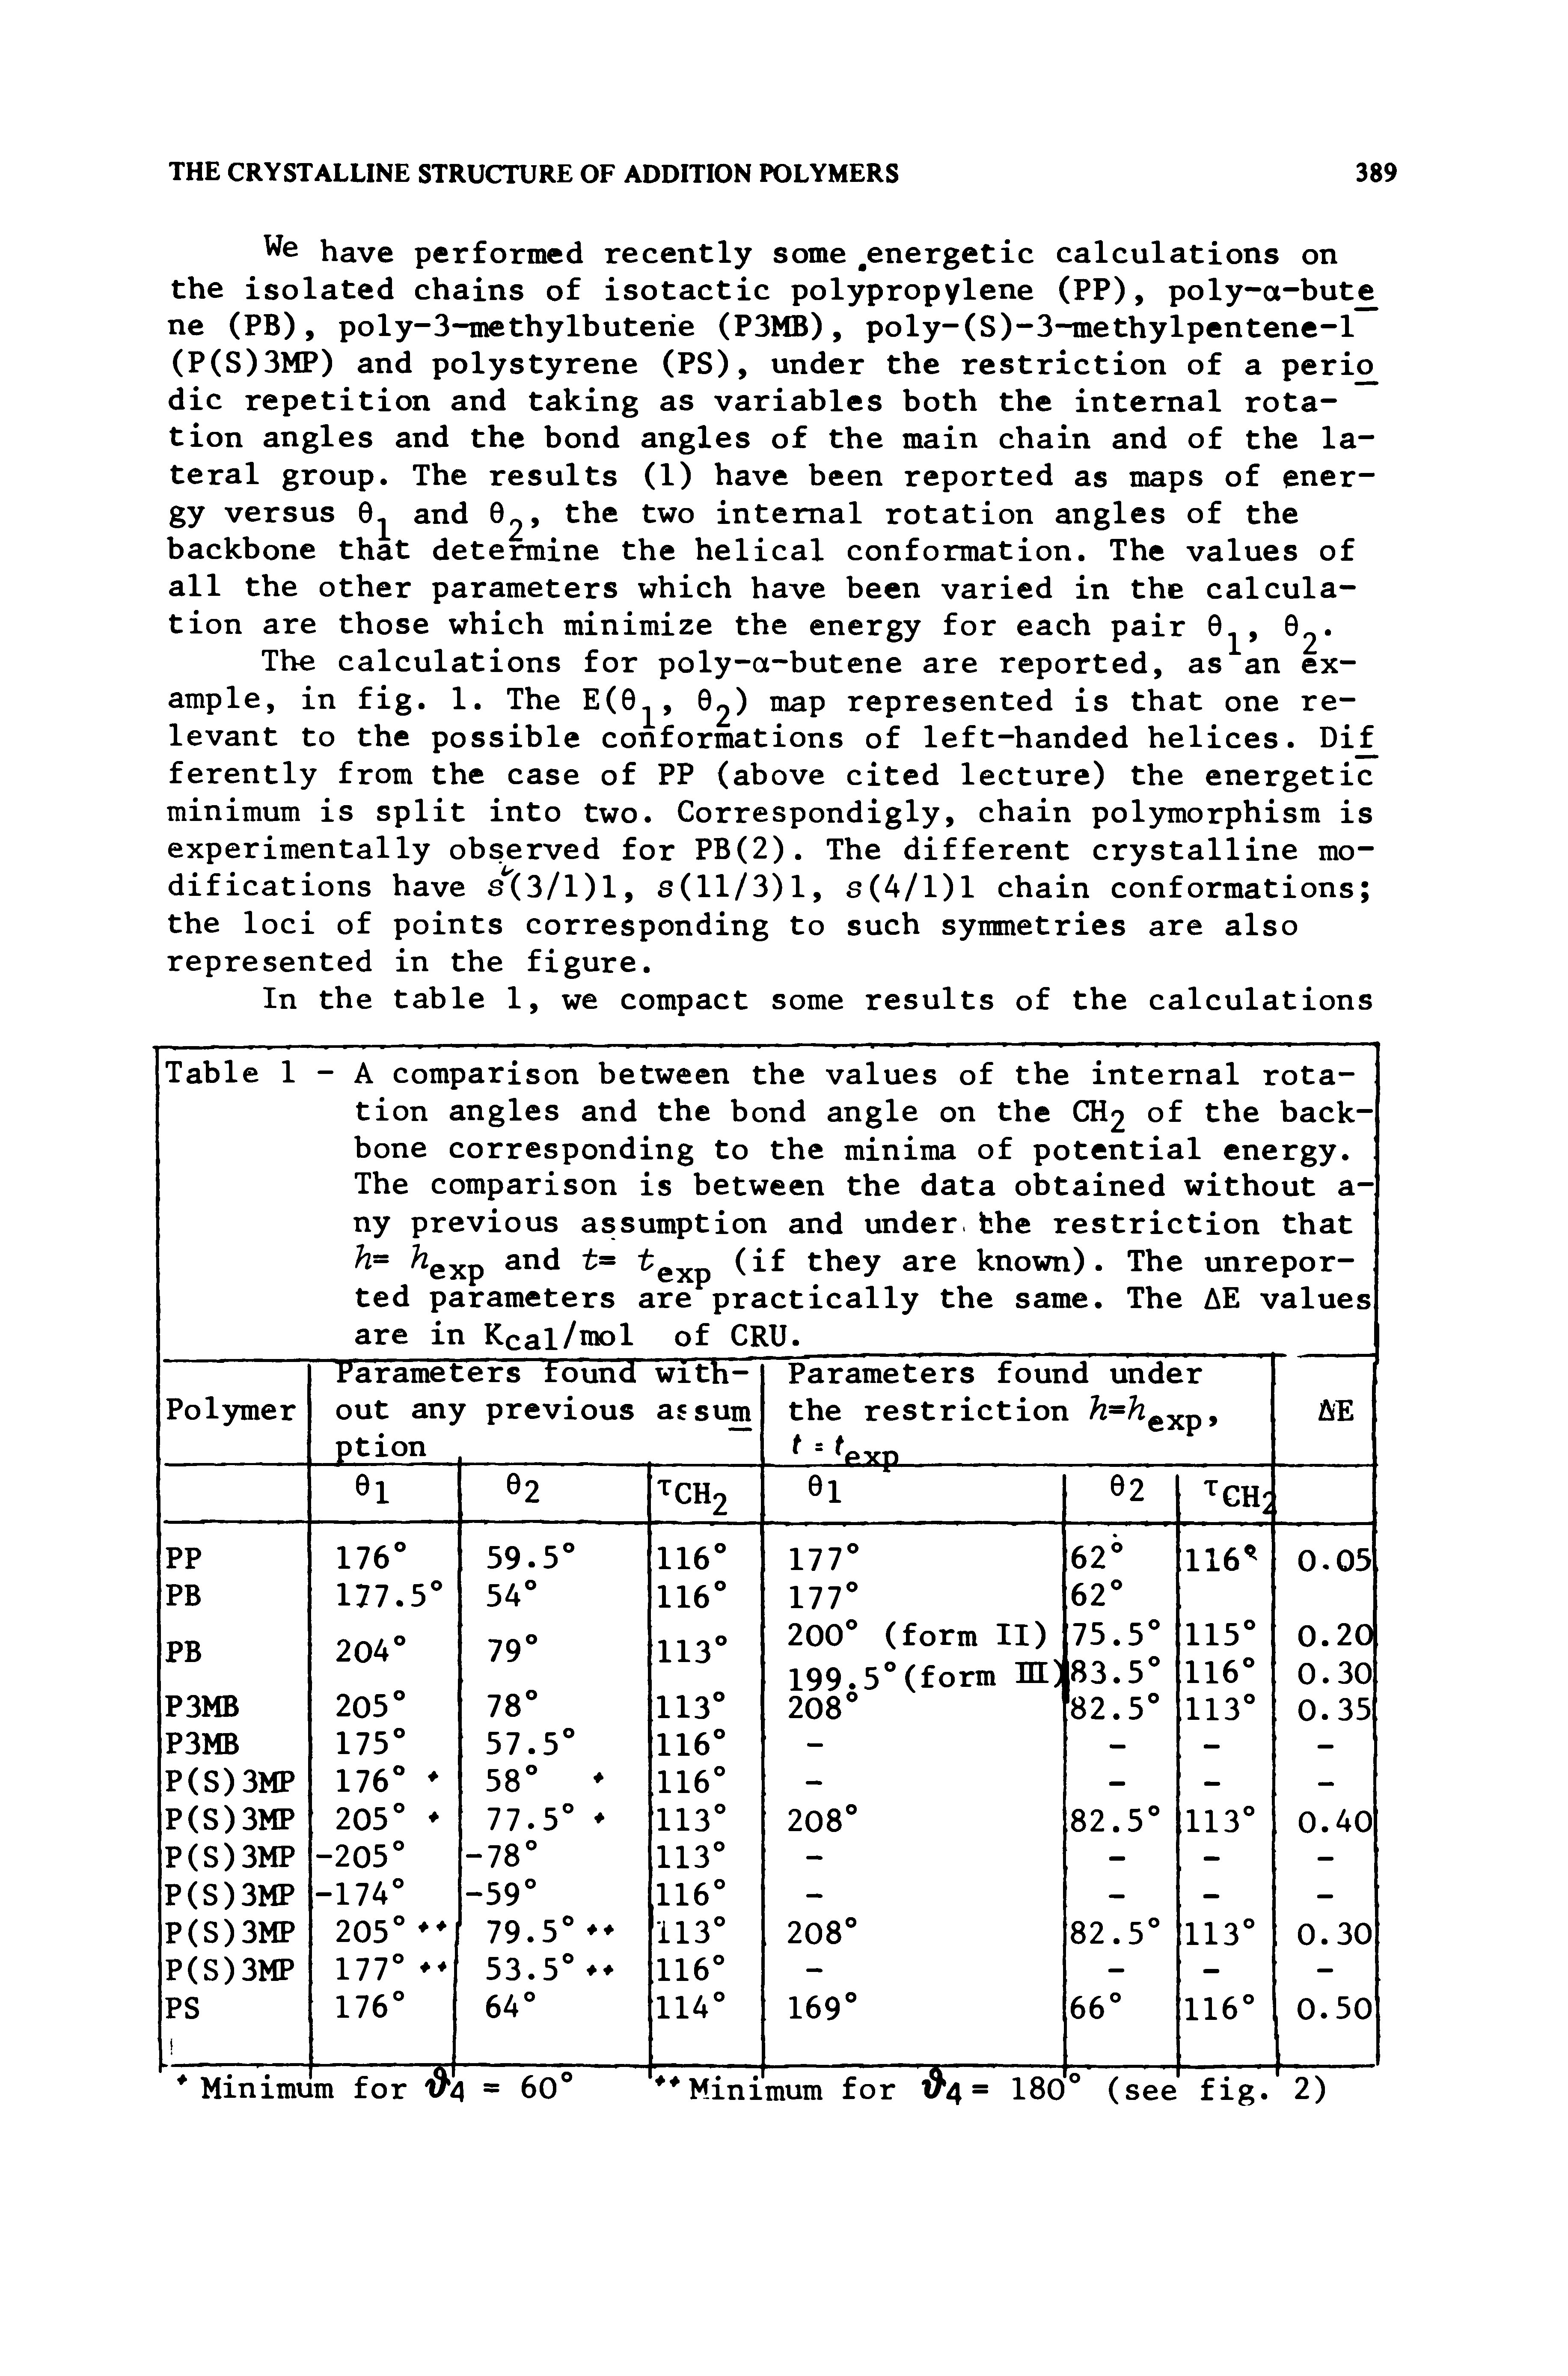 Table 1 - A comparison between the values of the internal rotation angles and the bond angle on the CH2 of the backbone corresponding to the minima of potential energy. The comparison is between the data obtained without a-ny previous assumption and under.the restriction that exp exp they are known). The unrepor-...